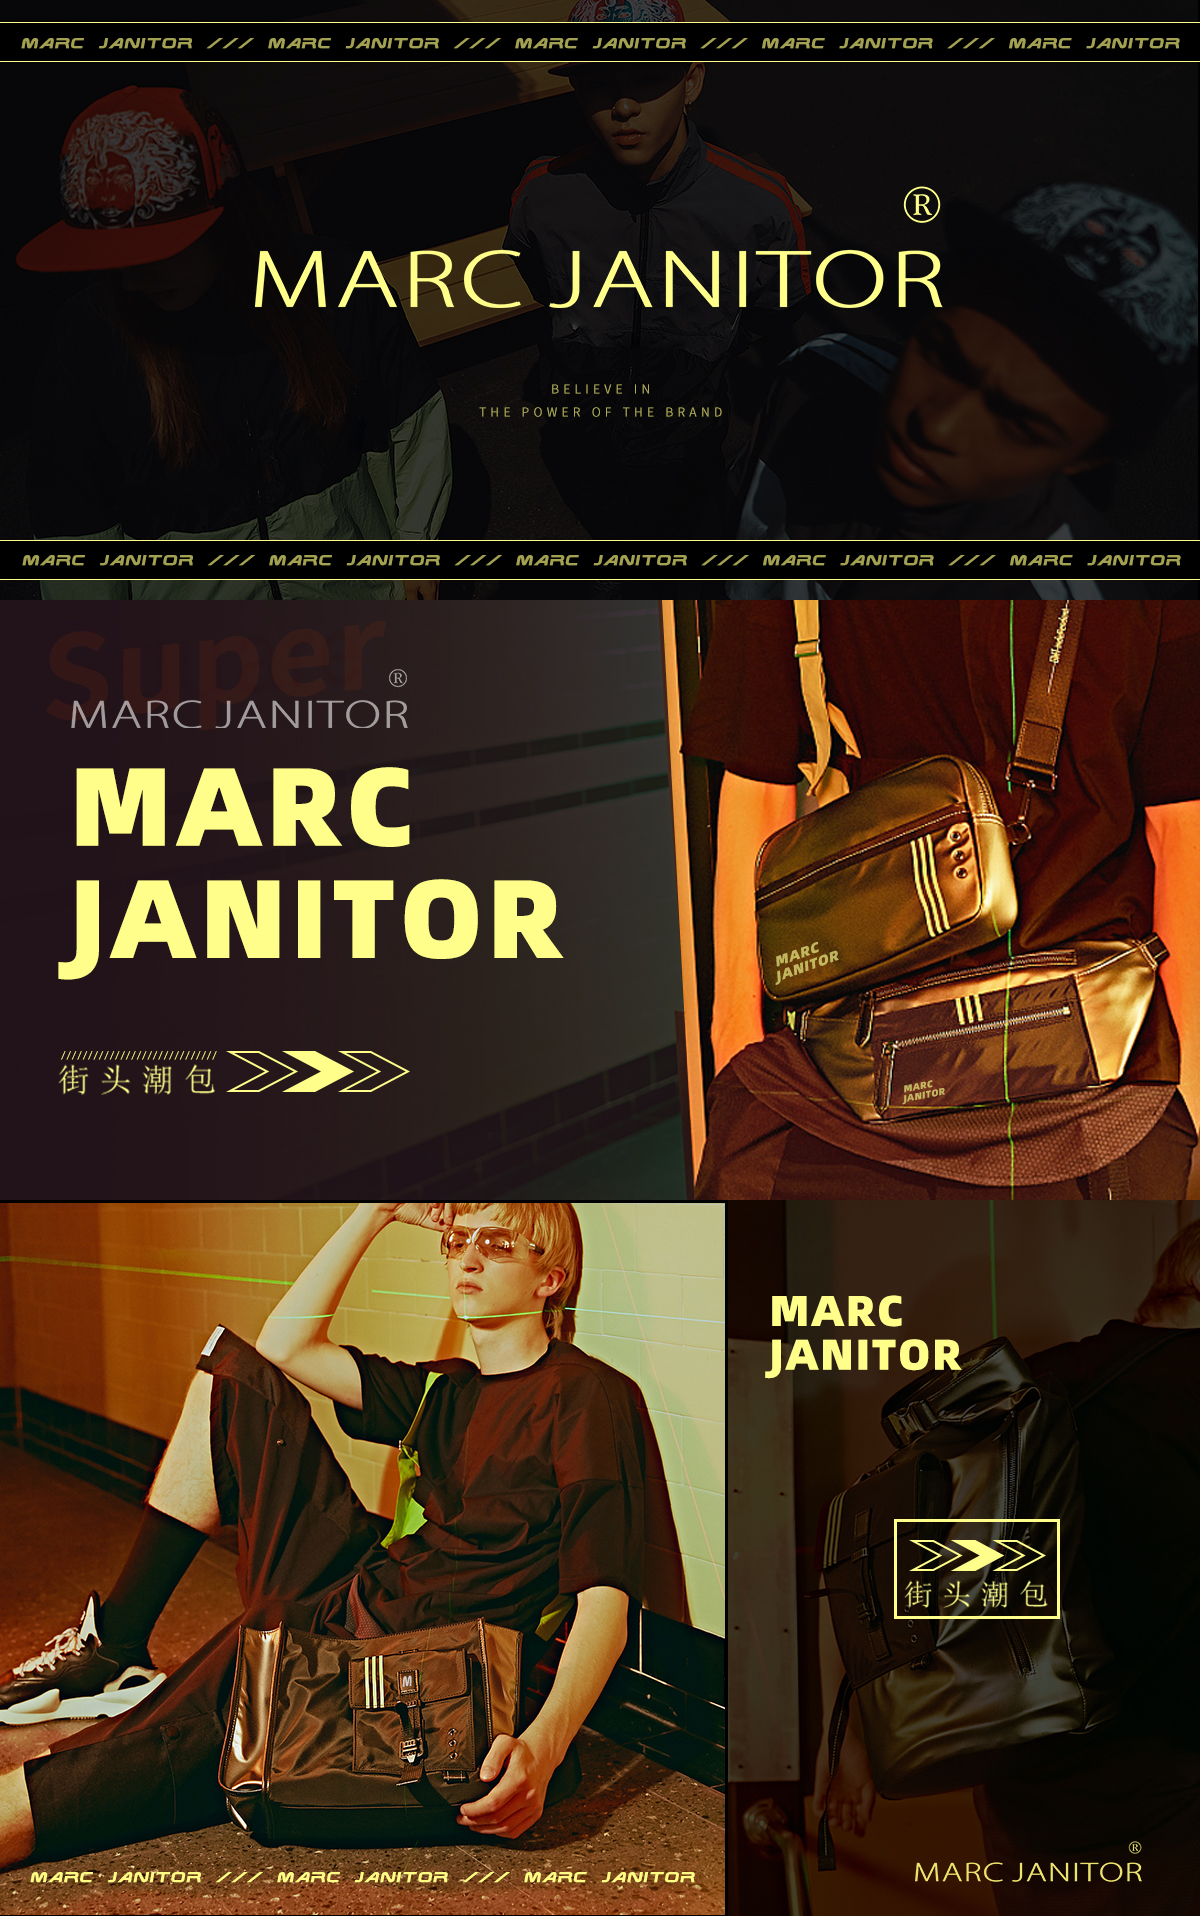 MARC JANITOR